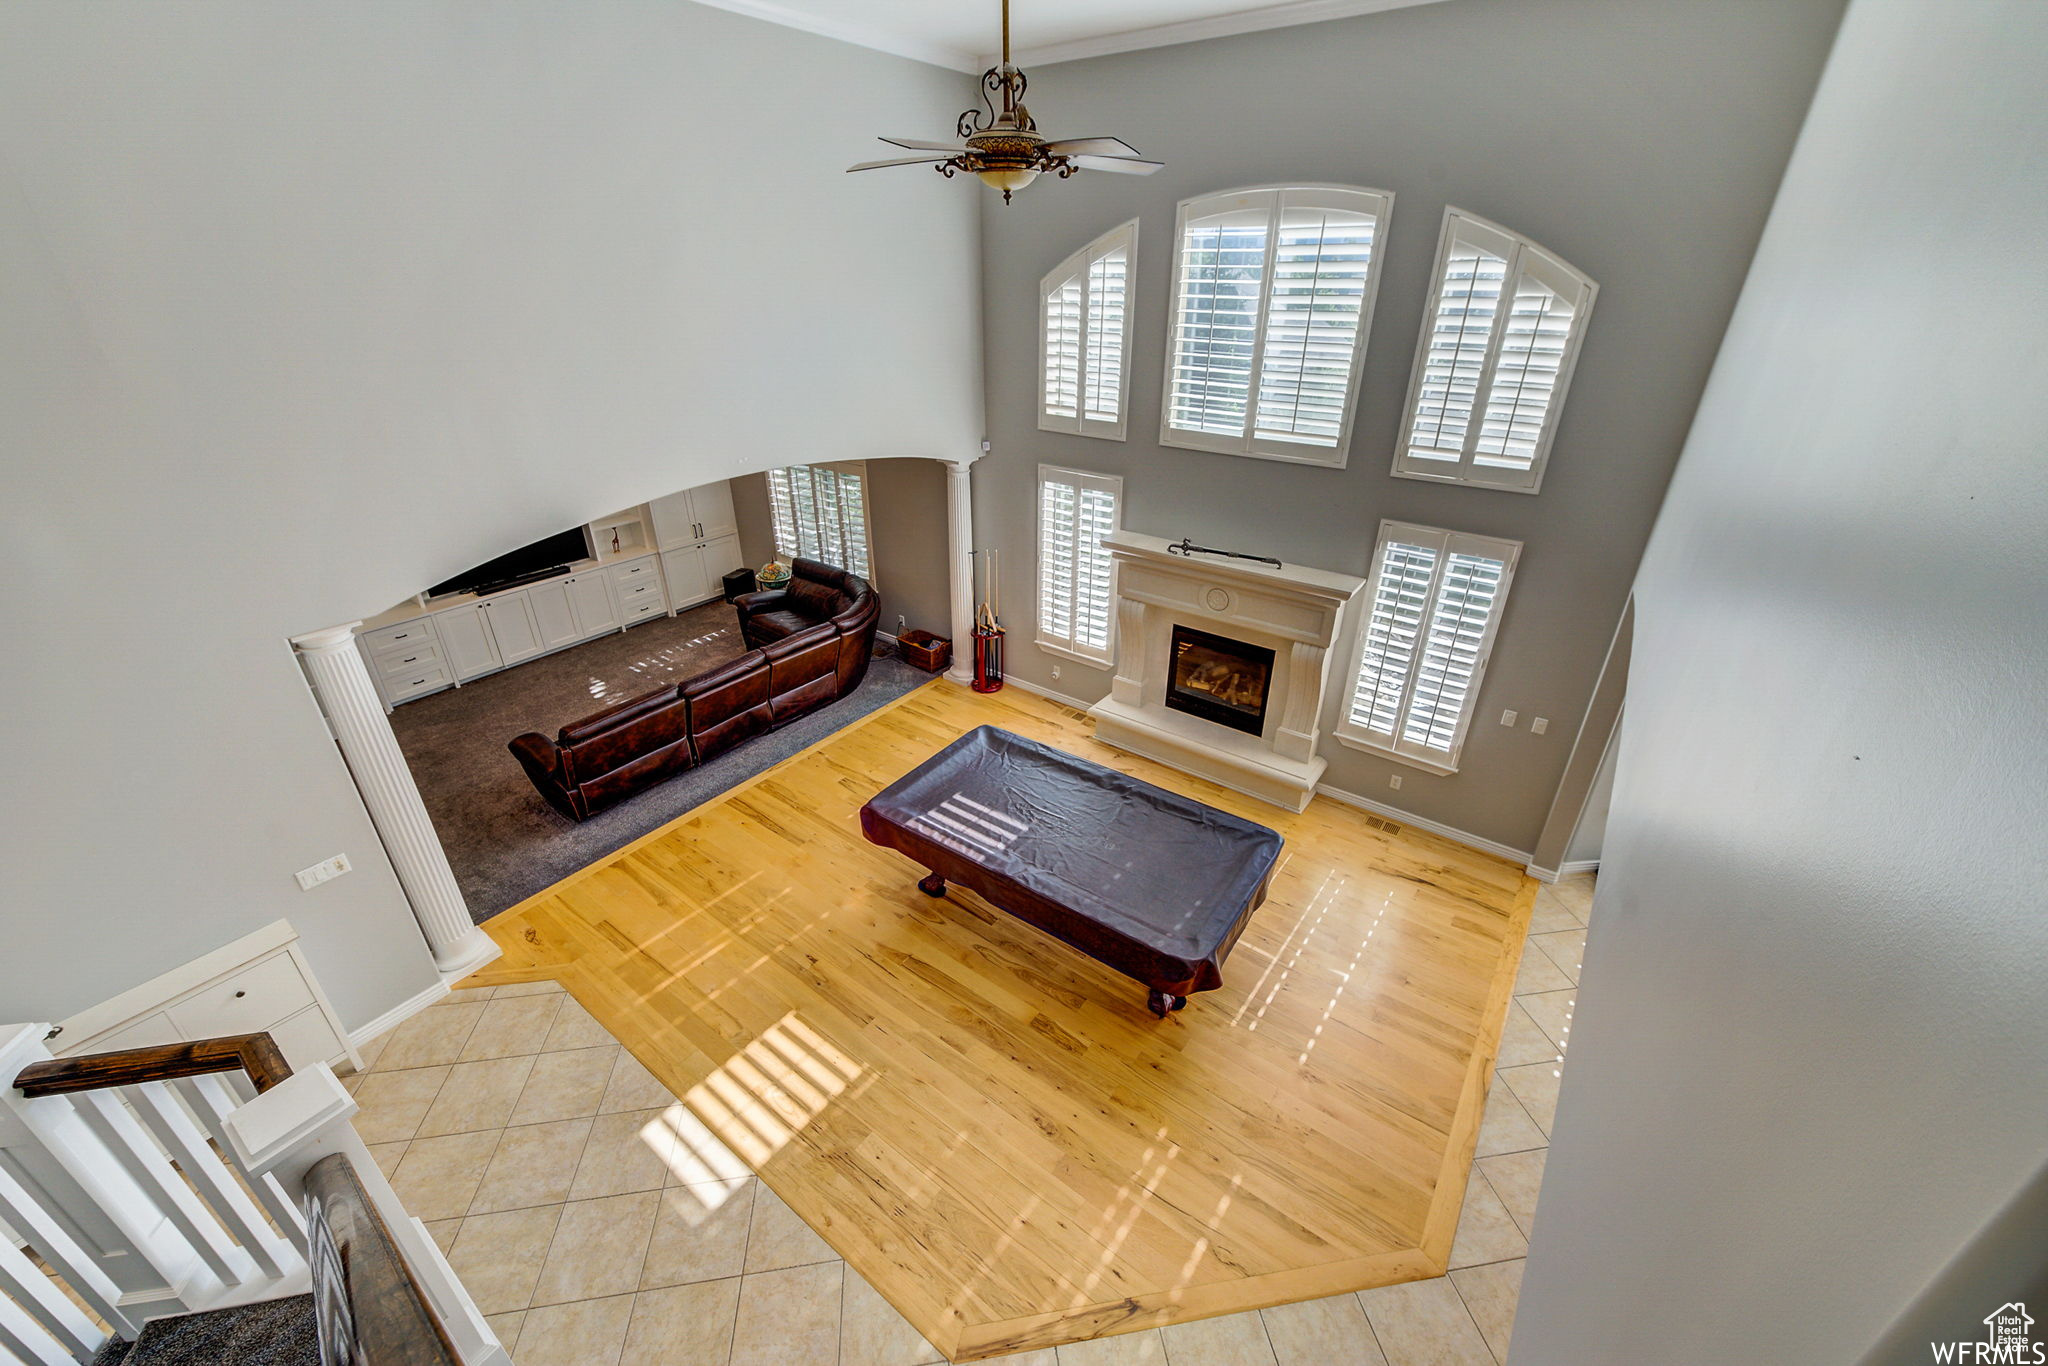 Living room featuring light hardwood / wood-style floors, crown molding, a towering ceiling, and ceiling fan